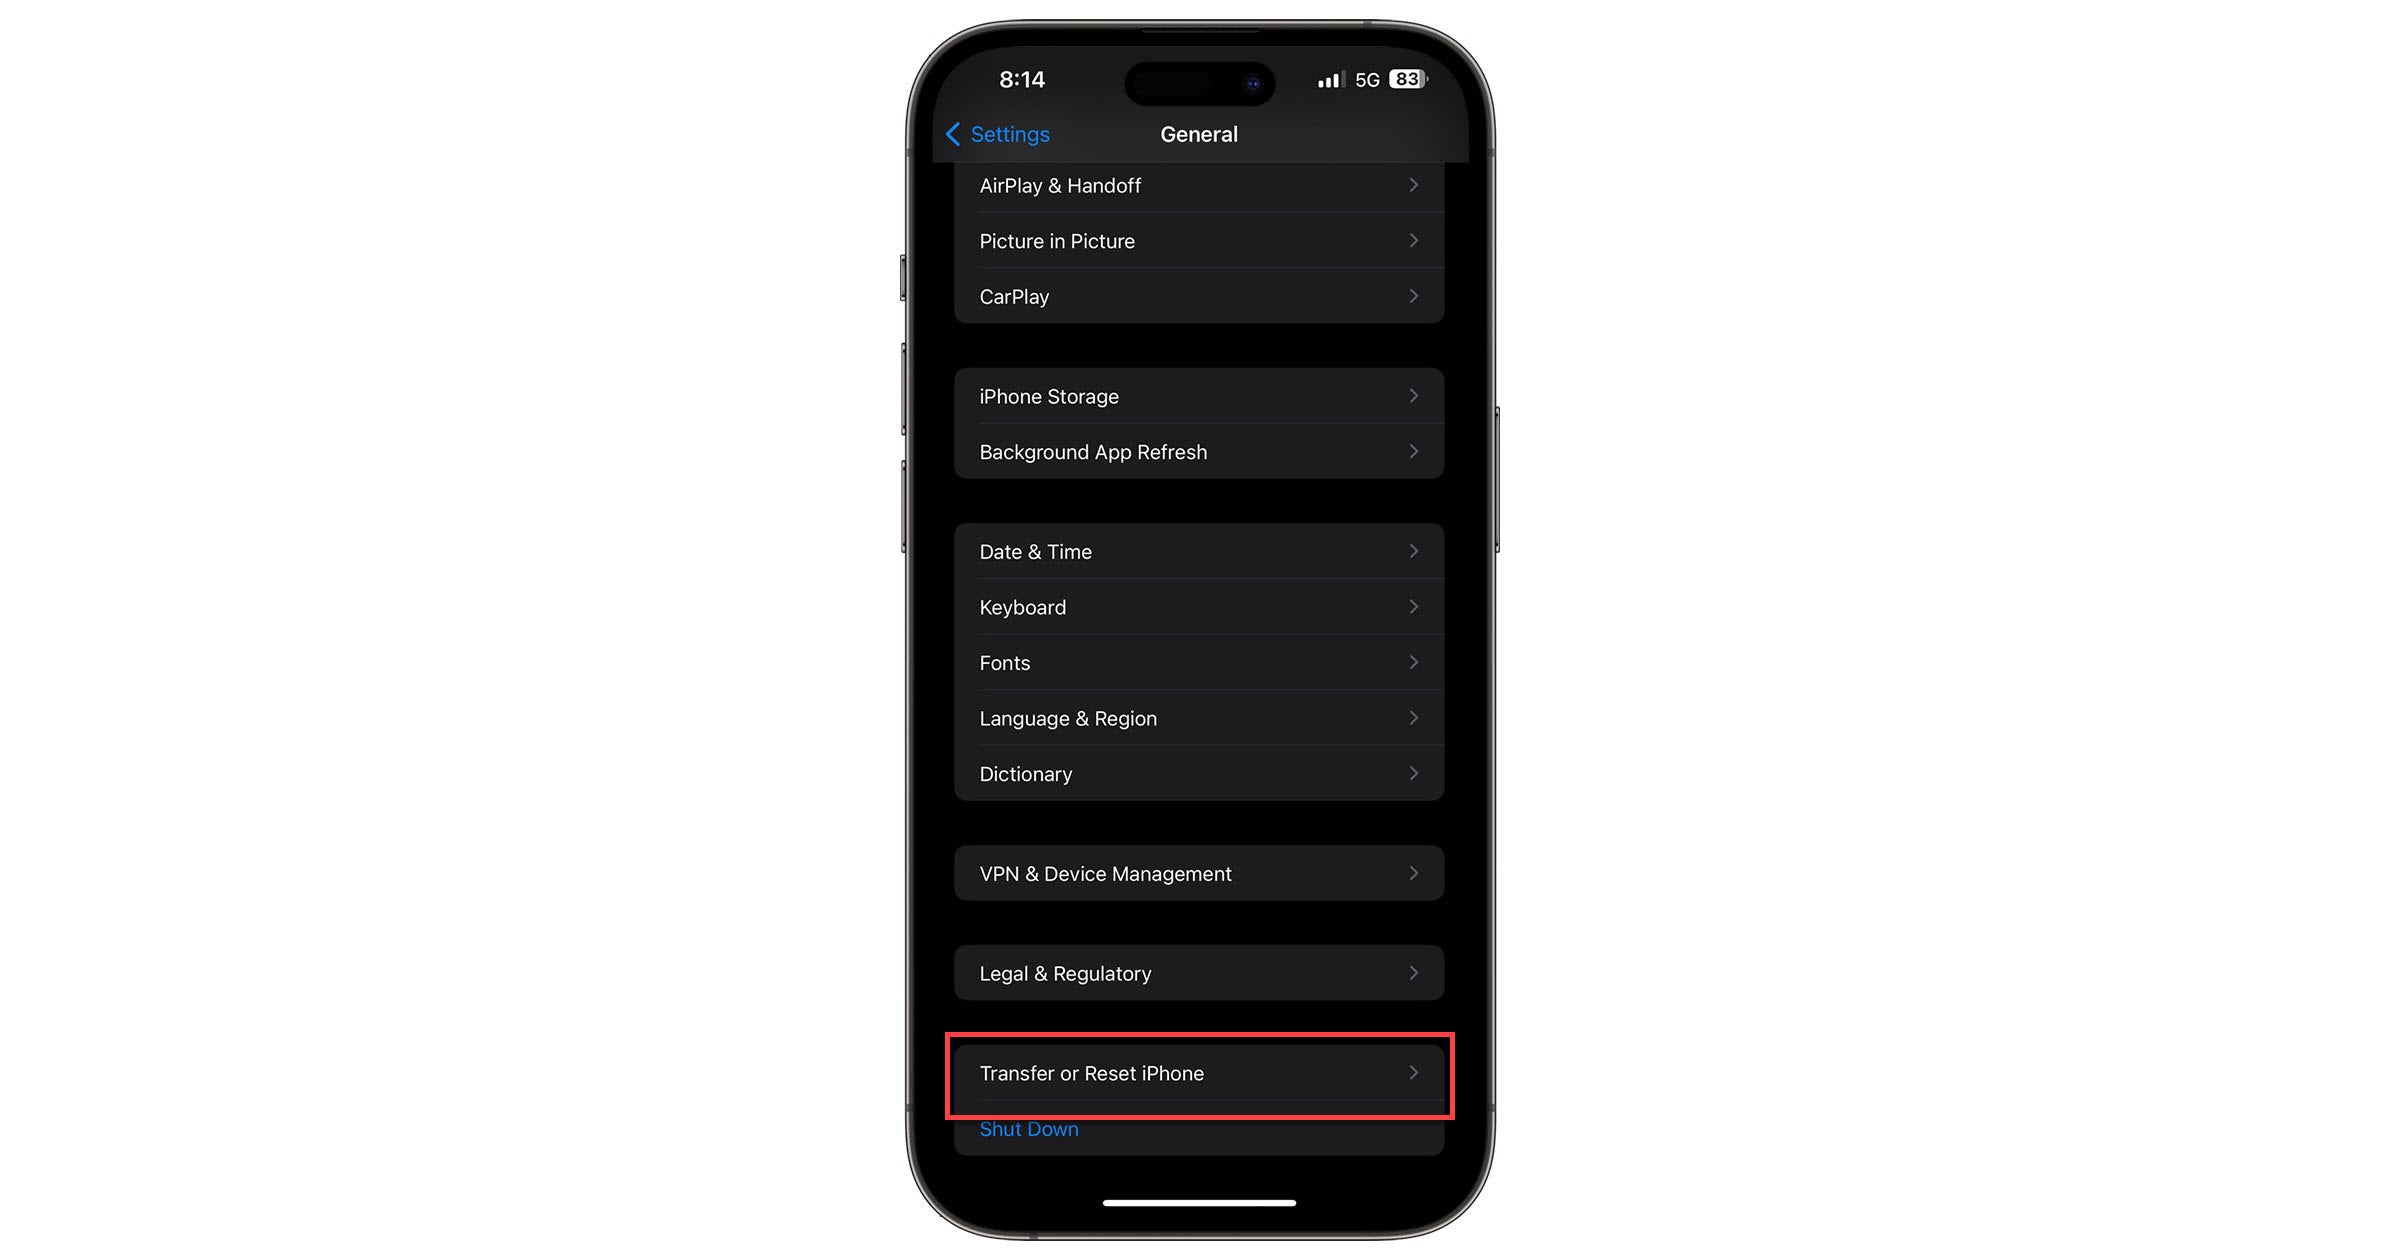 Transfer or Reset iPhone in iPhone Settings